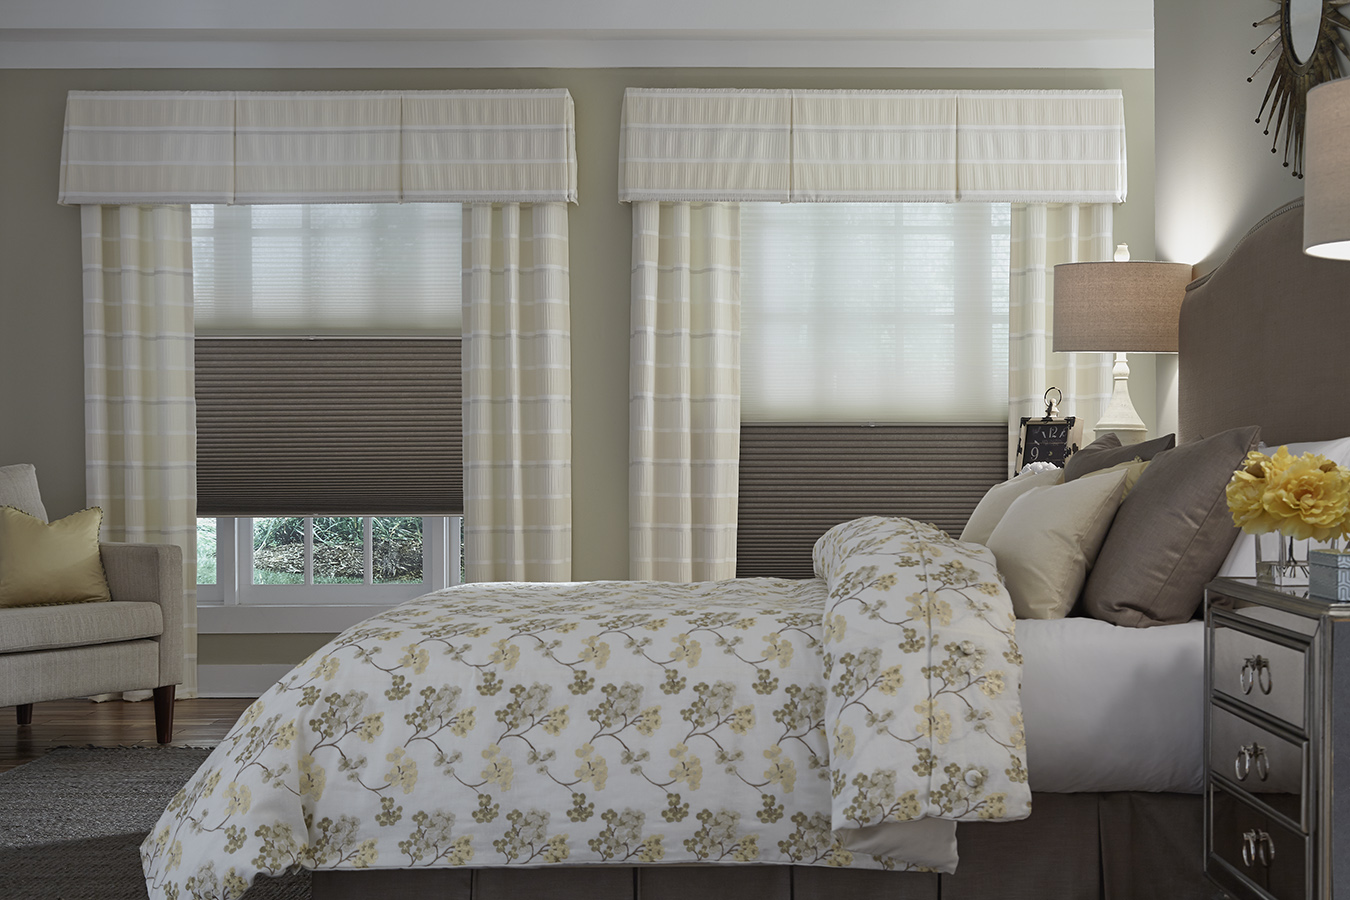 Duo Shade with valance and panels